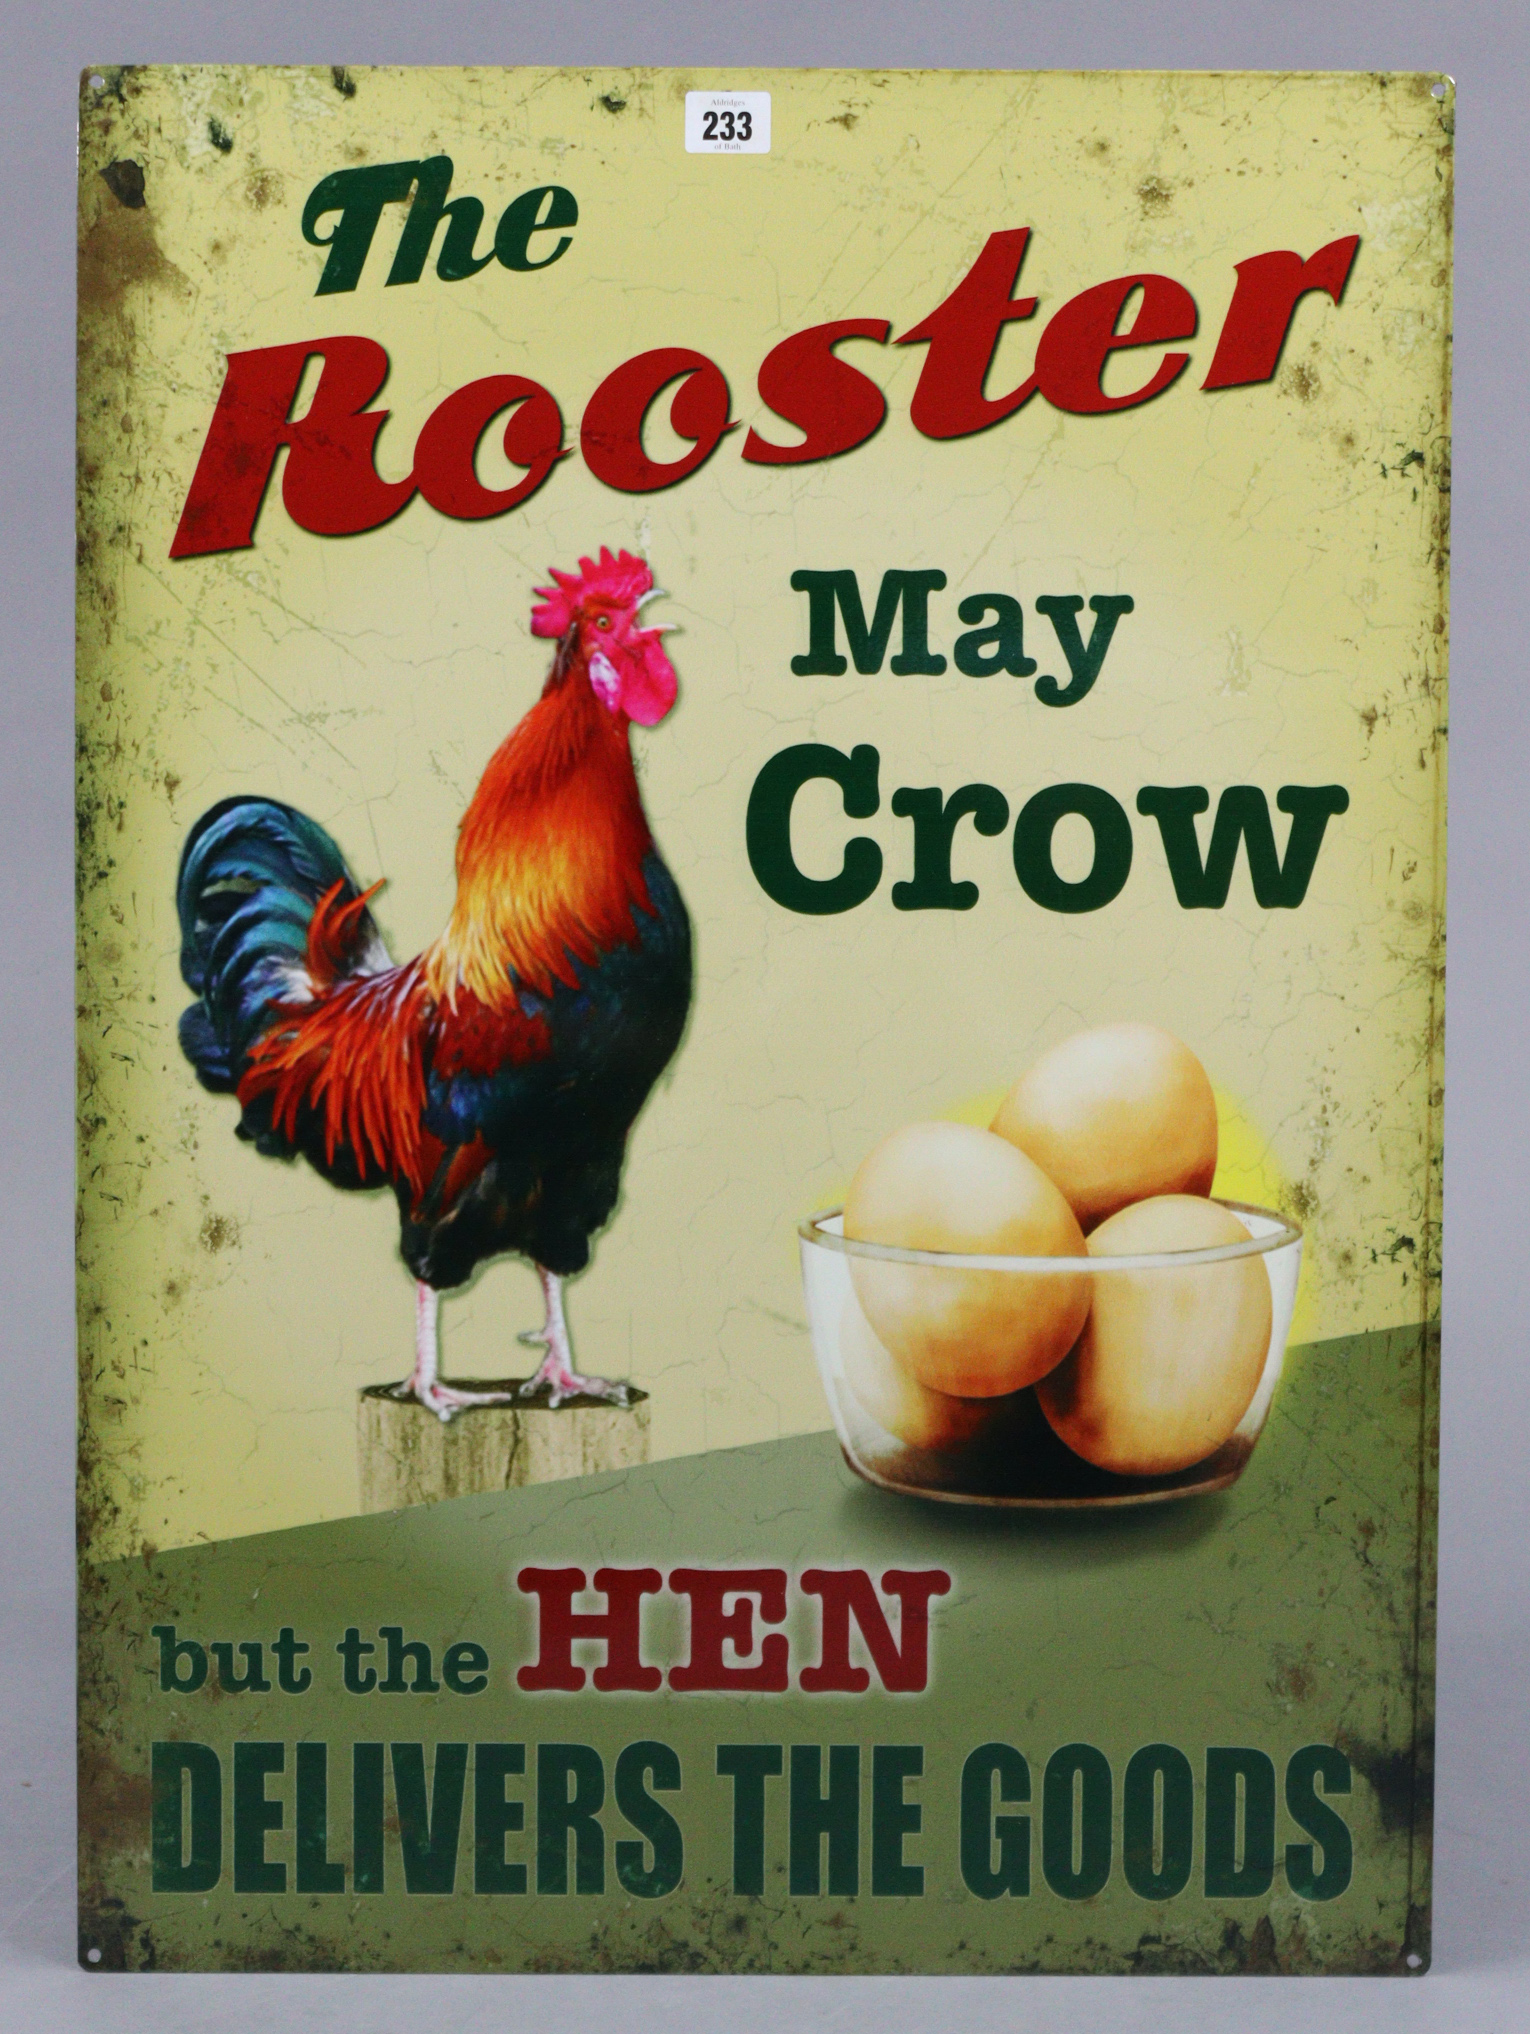 Another “The Rooster May Crow……”, 27½” x 19¾”.